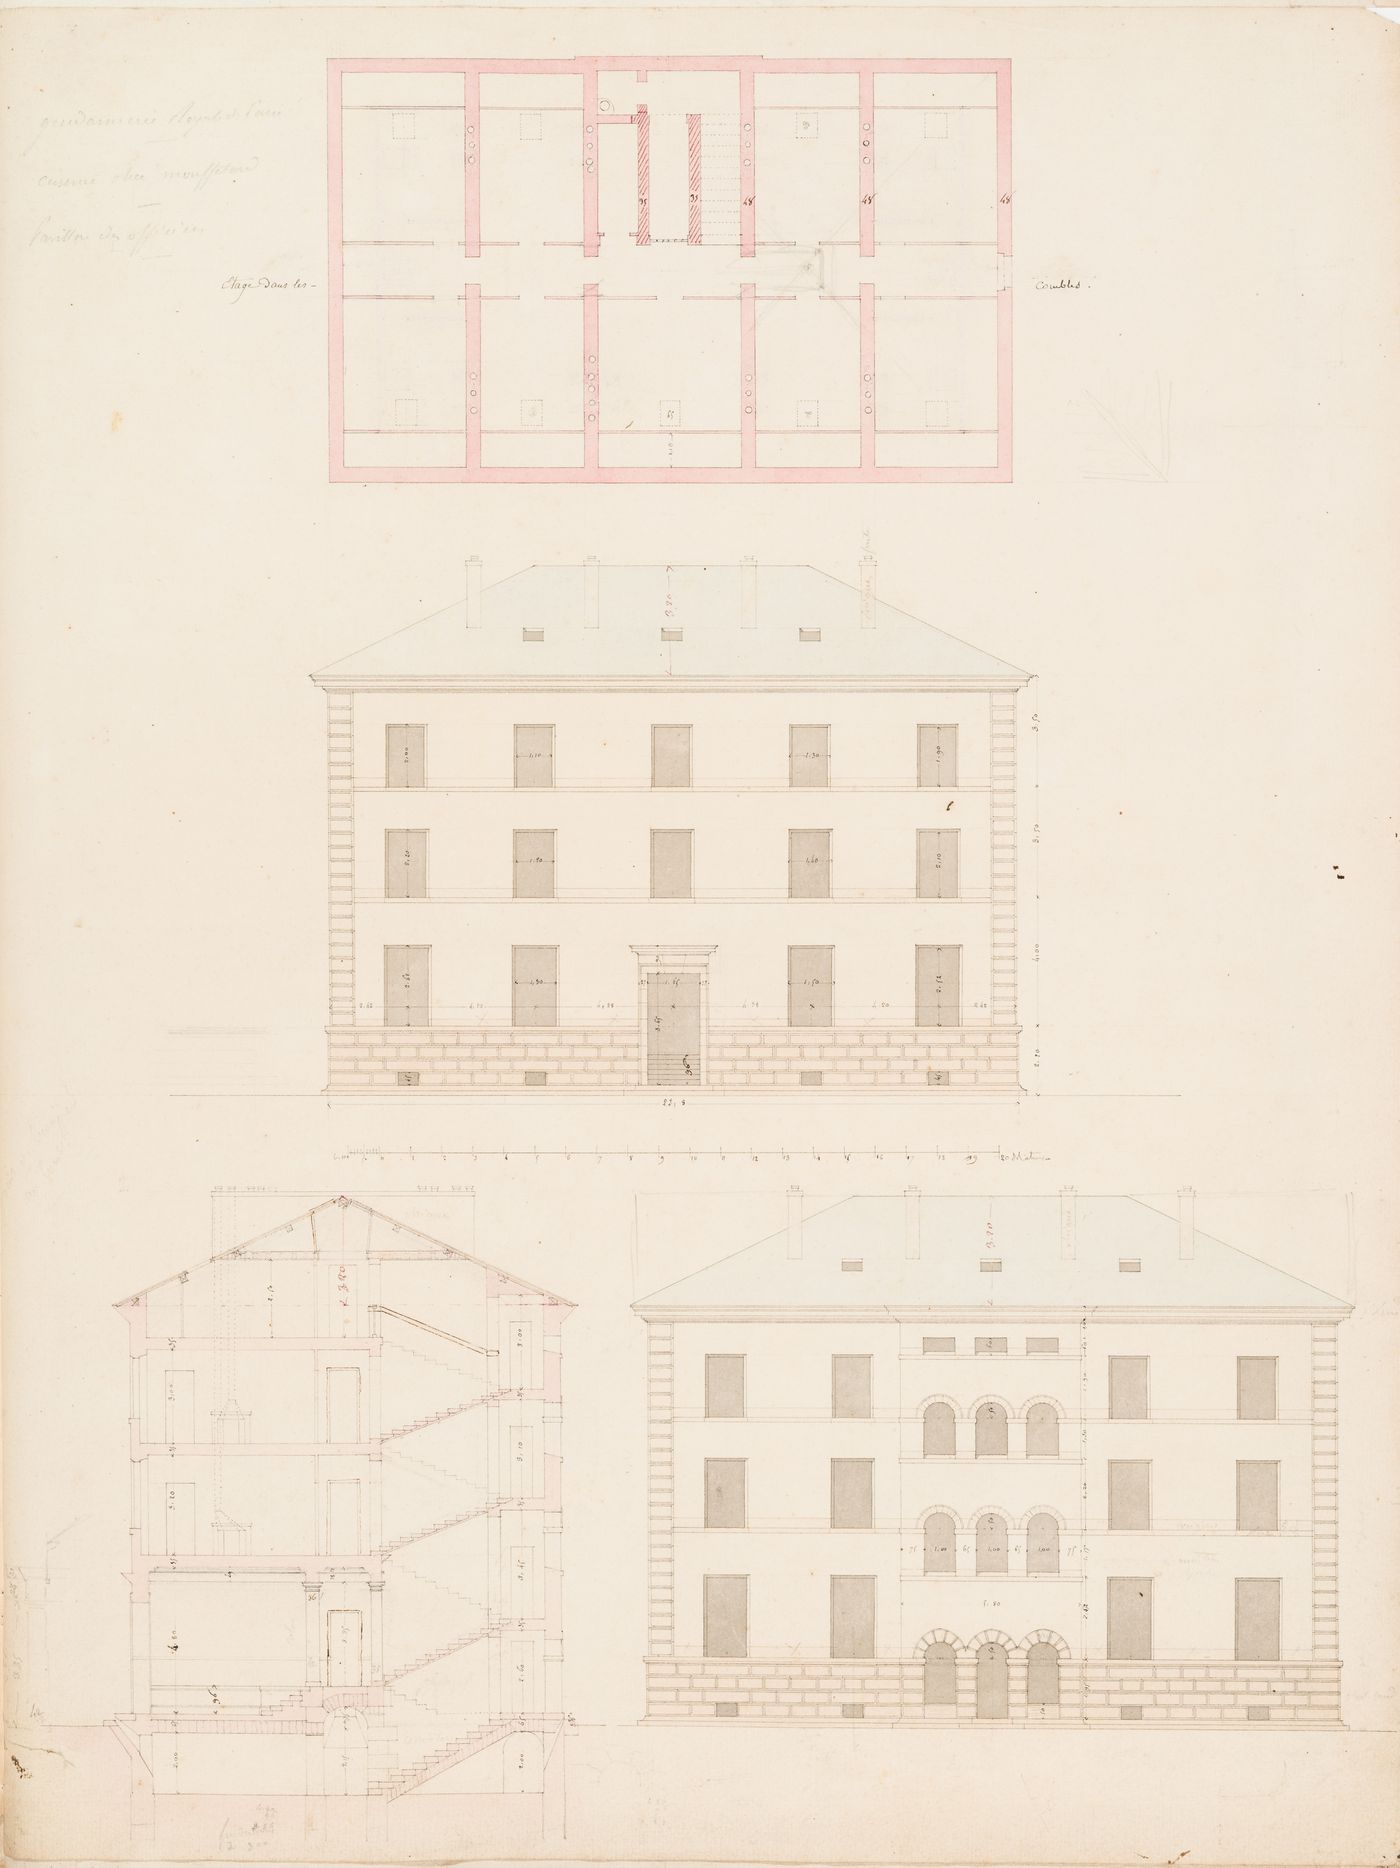 Project for the caserne de la Gendarmerie royale, rue Mouffetard: Elevations, plan for the "comble", and cross section for the officers' pavilion